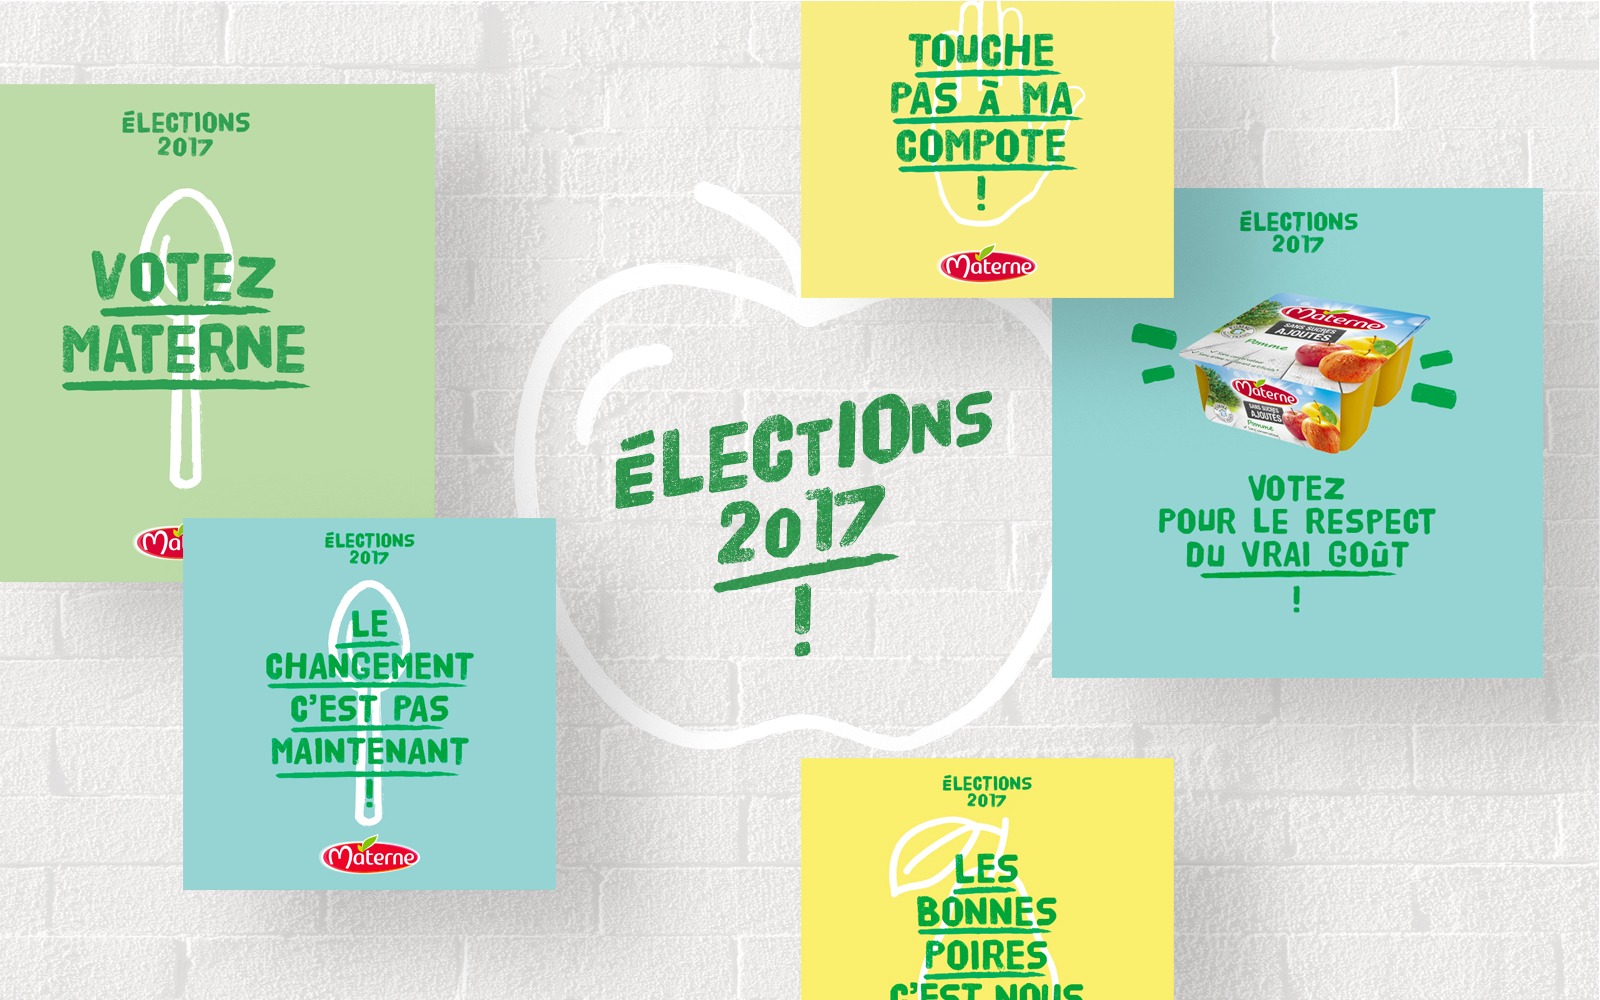 materne elections campagne